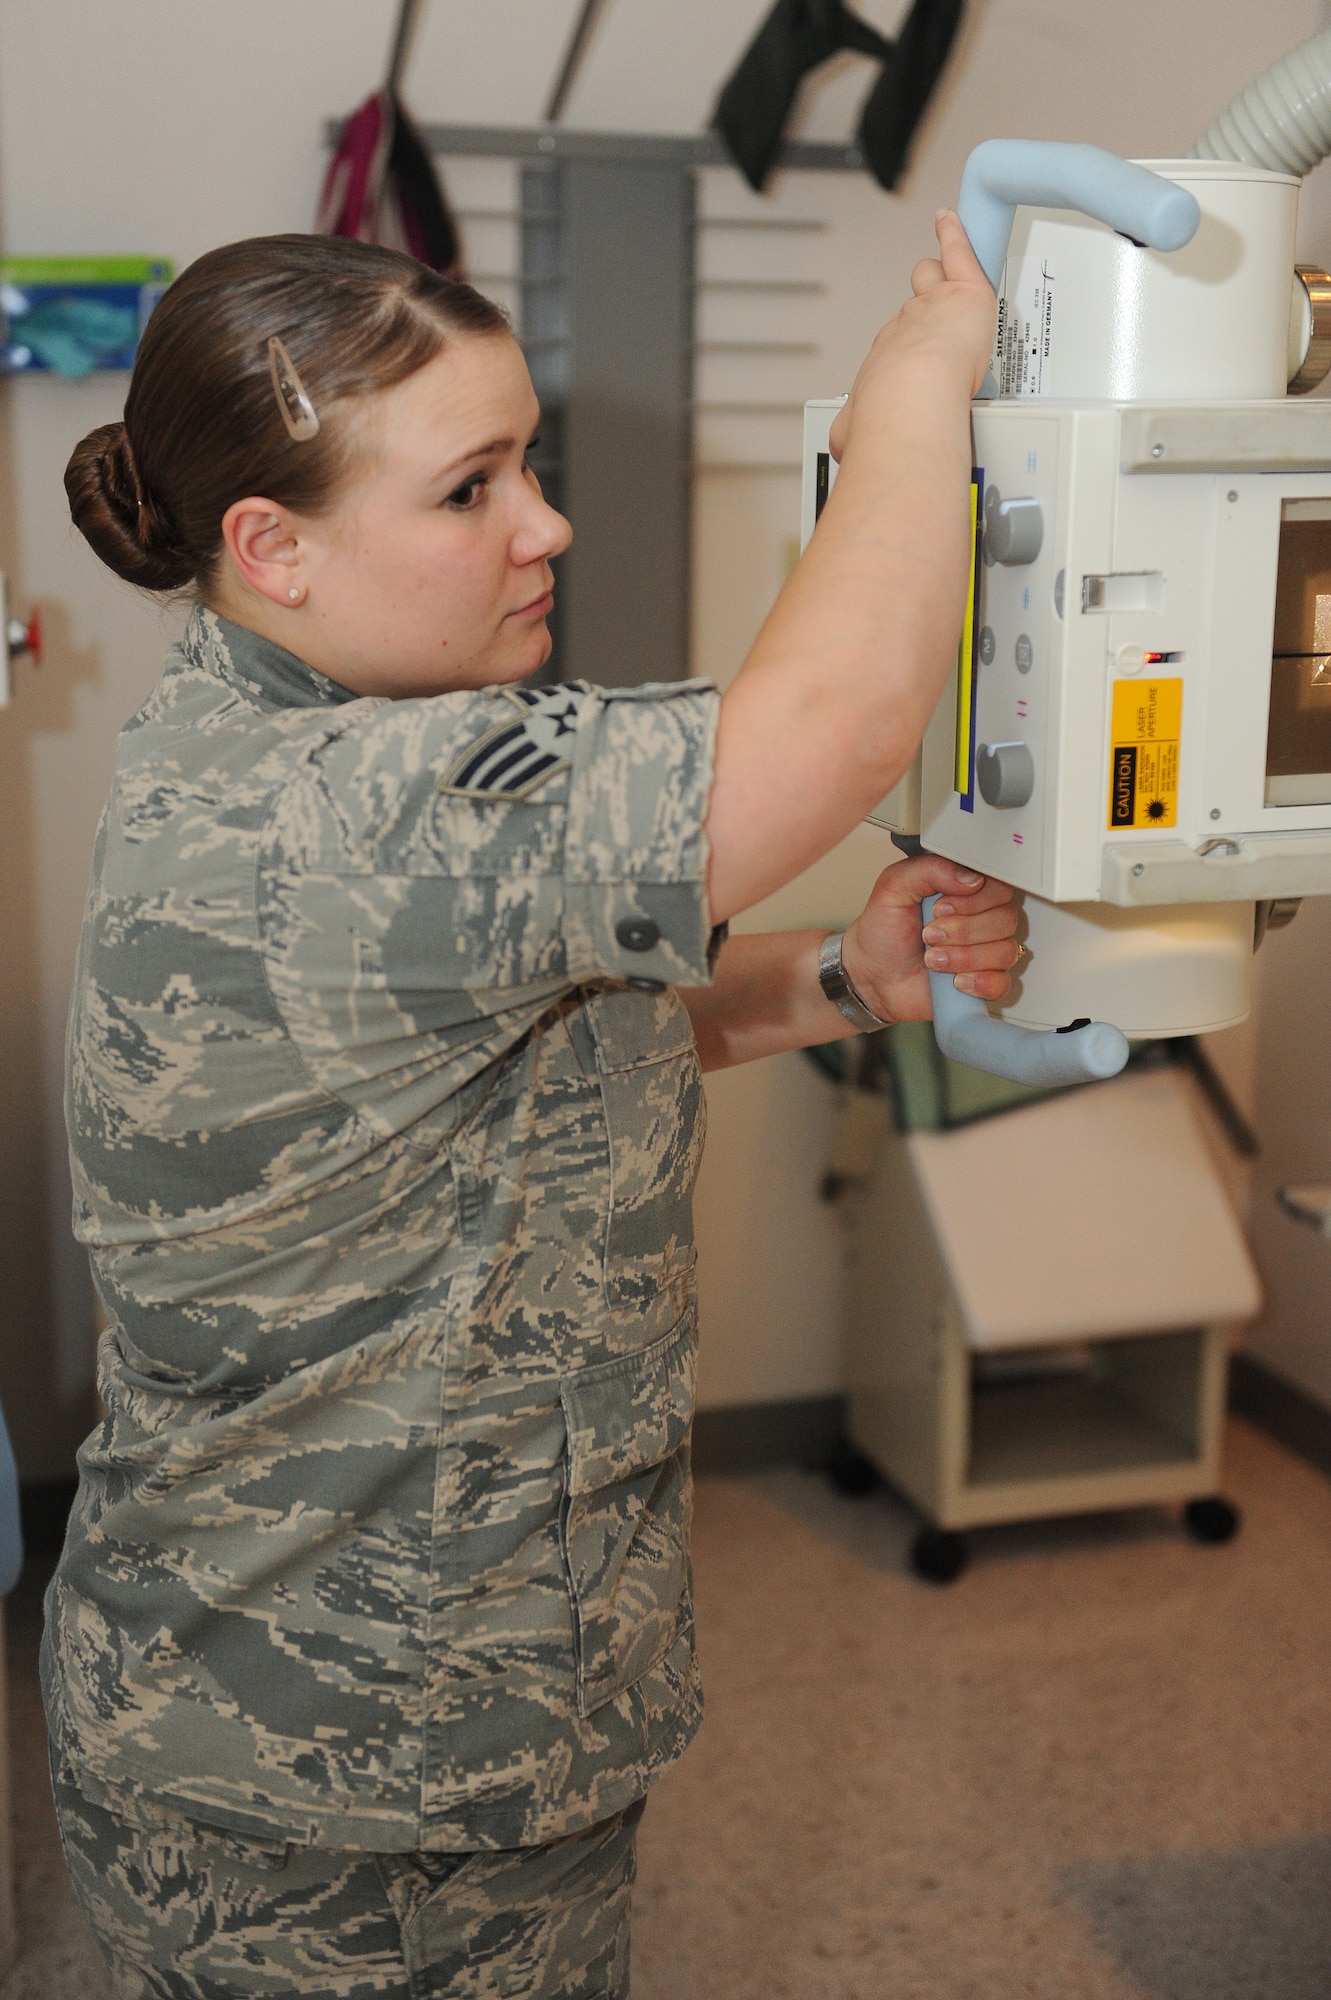 Senior Airman Casey Burch lines up an X-ray tube at Scott Air Force Base, Ill., June 3, 2014.  The tube moves up and down to coincide with a patient’s anatomy for each specific exam, including chest X-rays.  Burch is a 375th Medical Support Squadron radiology technologist.  (U.S. Air Force photo by Staff Sgt. Maria Bowman)